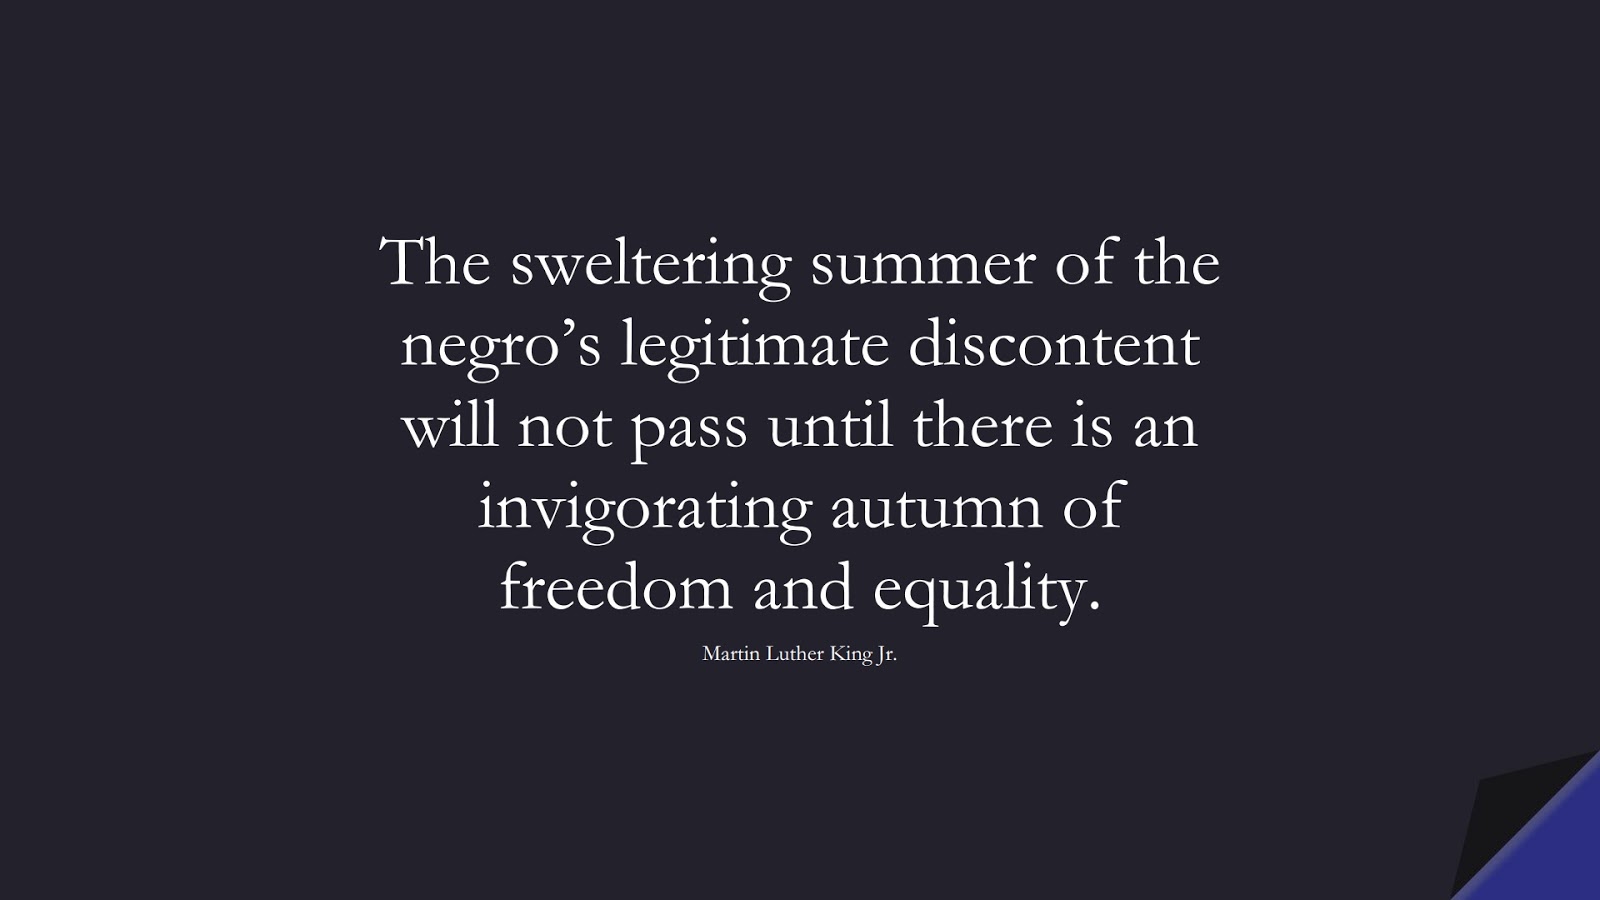 The sweltering summer of the negro’s legitimate discontent will not pass until there is an invigorating autumn of freedom and equality. (Martin Luther King Jr.);  #MartinLutherKingJrQuotes